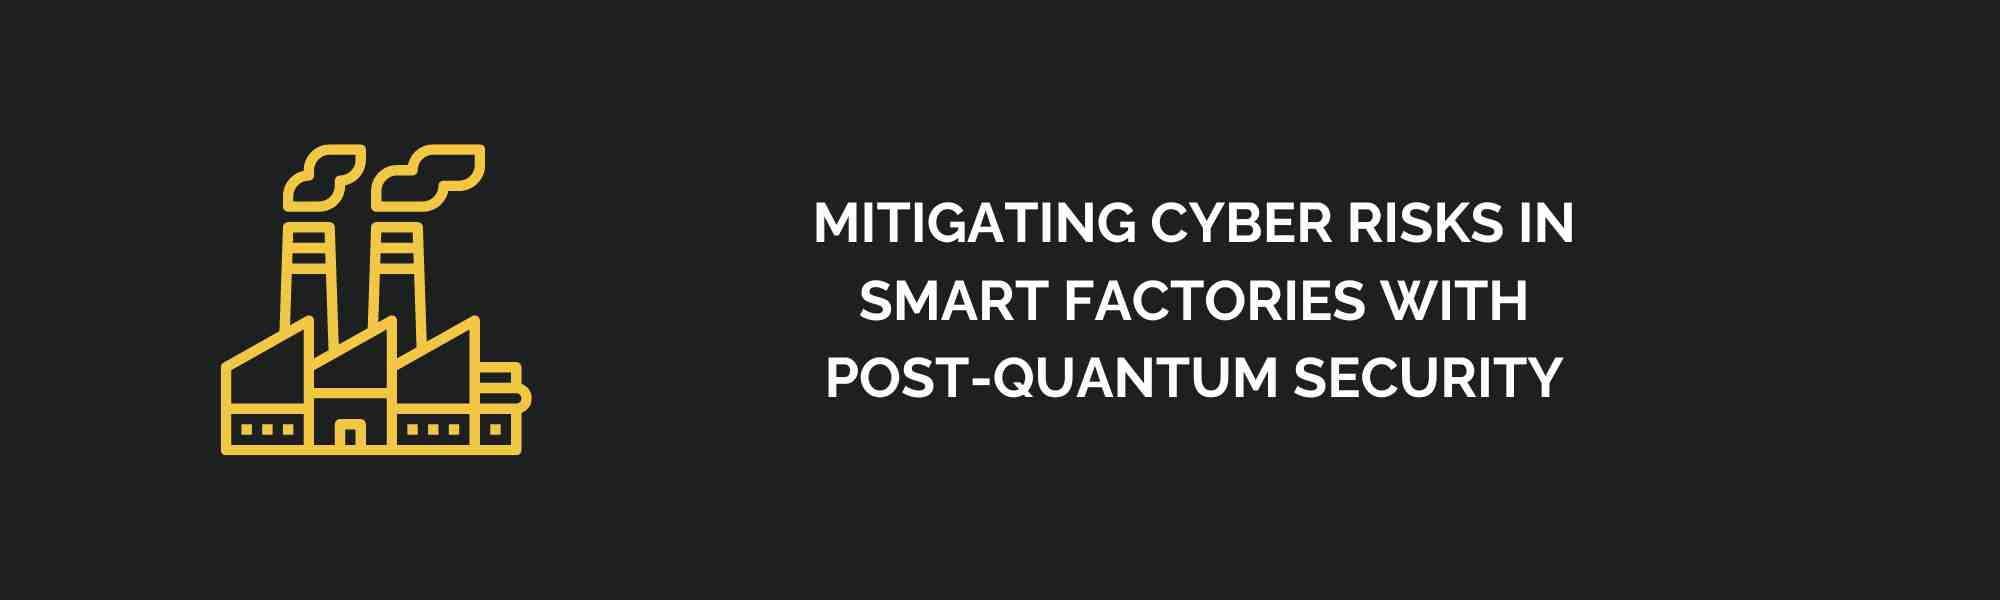 Mitigating Cyber Risks in Smart Factories with Post-Quantum Security